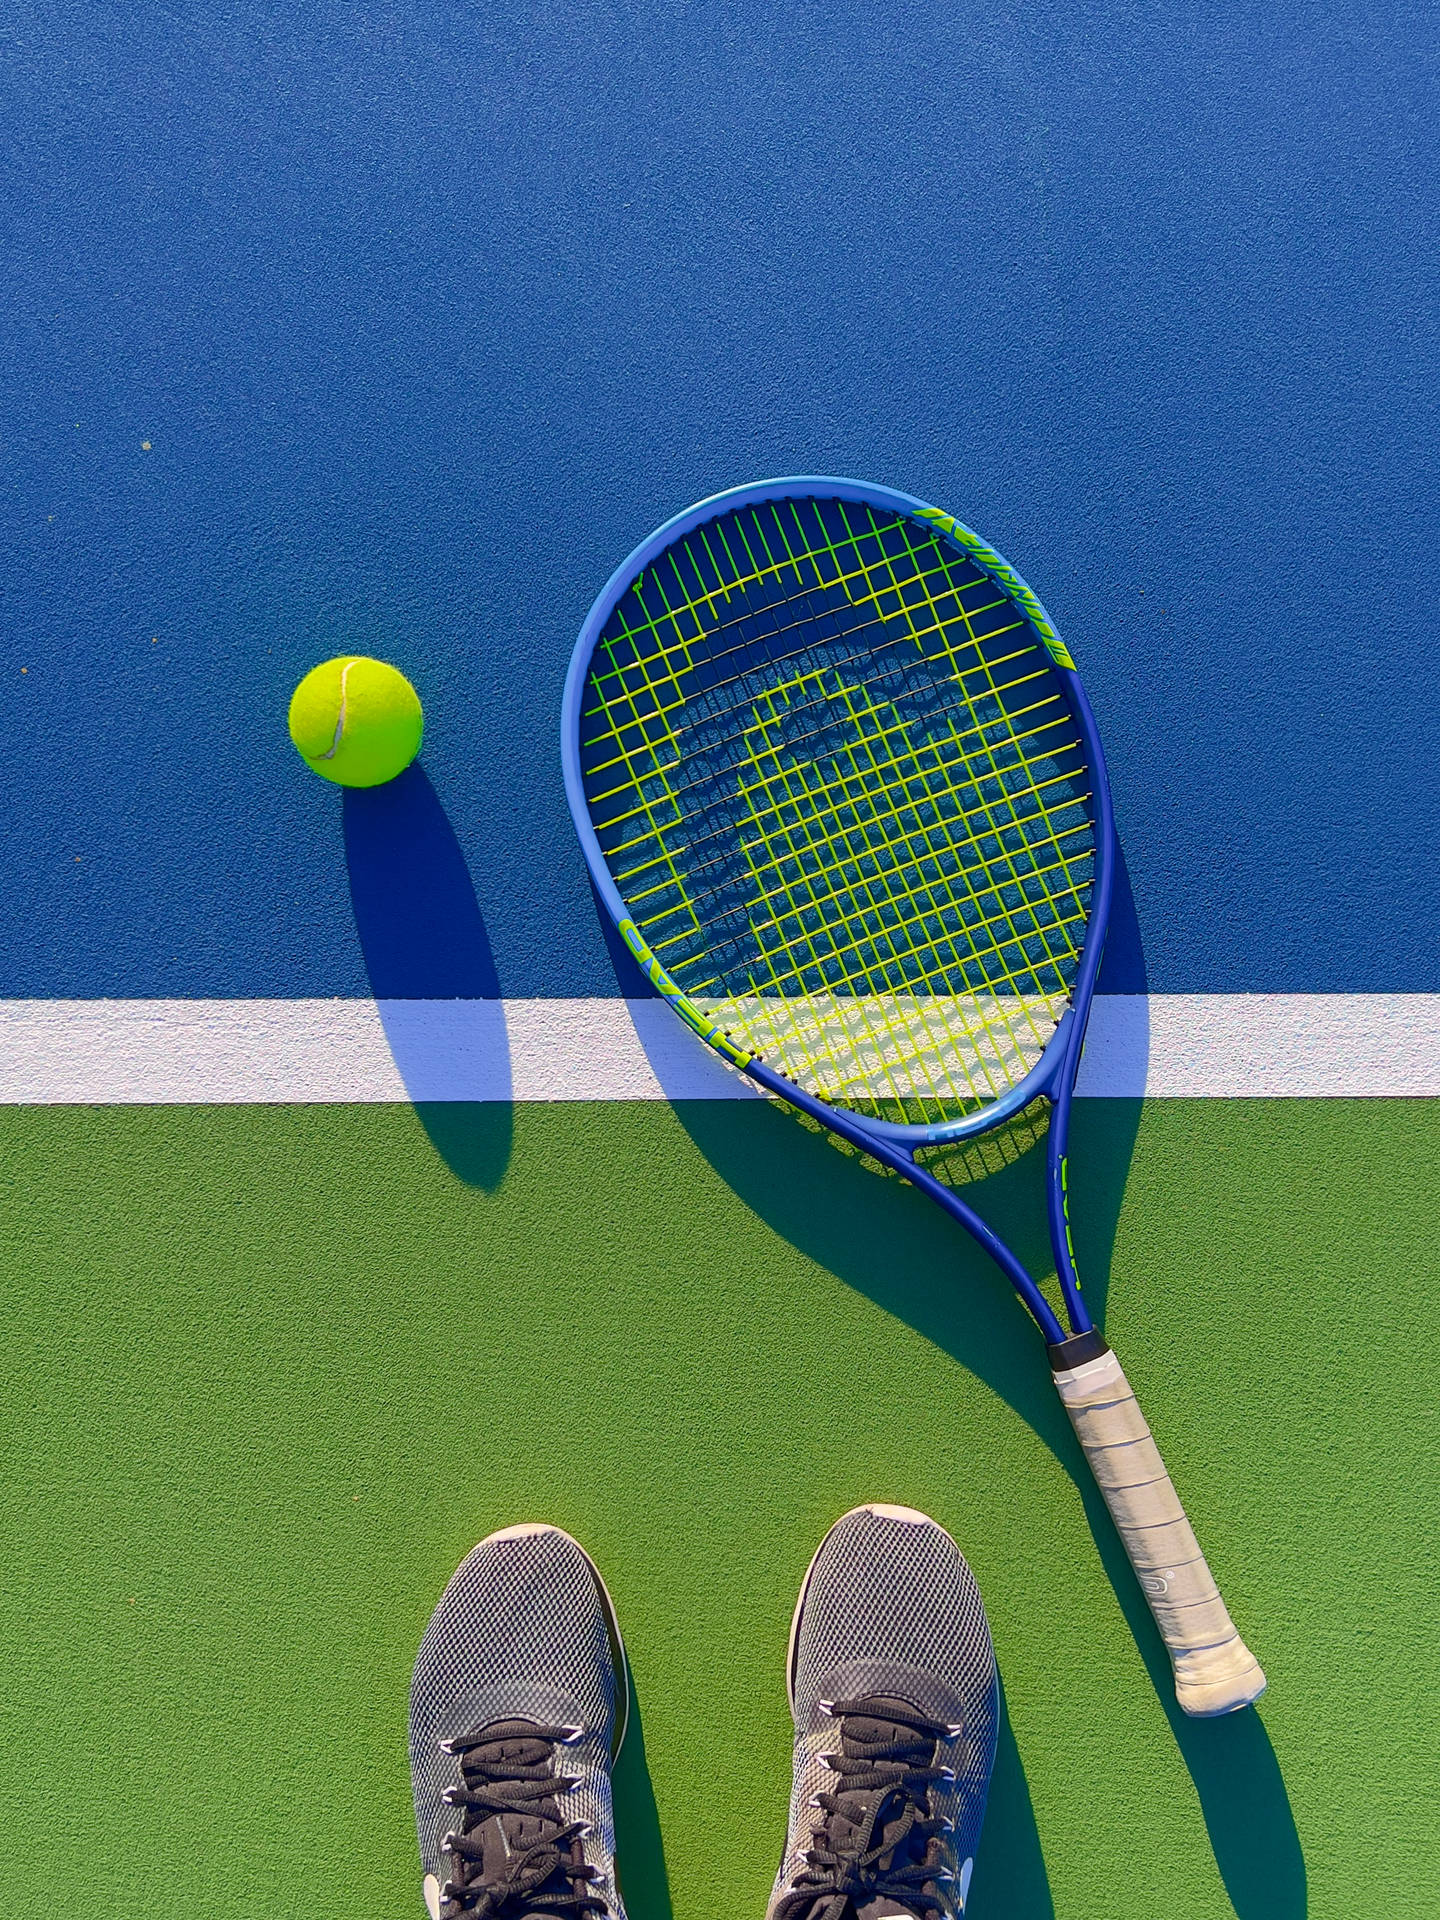 2518X3357 Tennis Wallpaper and Background